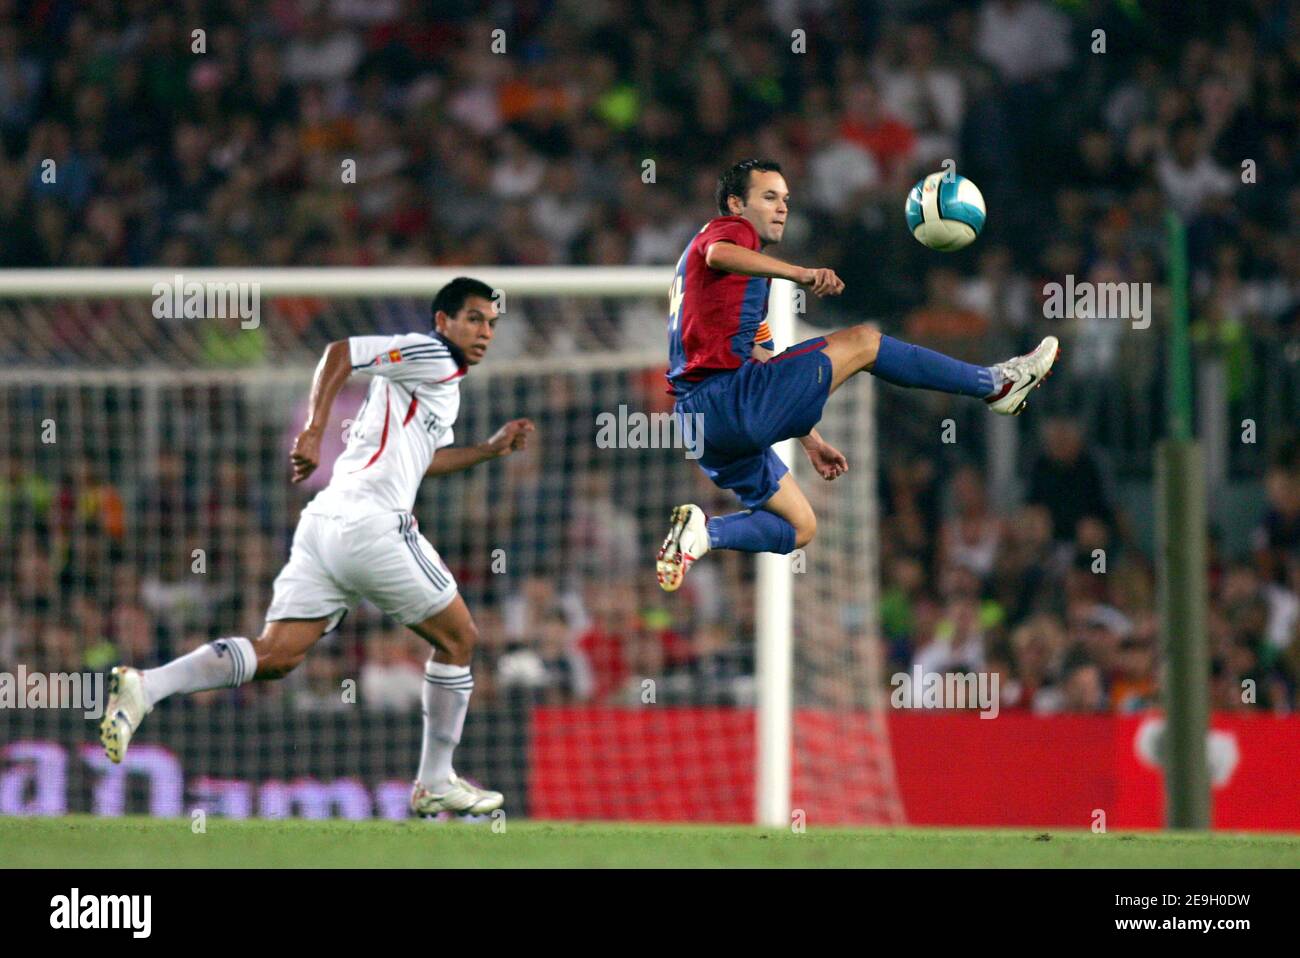 Barcelona's Andres Iniesta in action during the Gamper trophy, FC Barcelona vs Bayern at Nou Camp, in Barcelona, Spain, on August 22, 2006. Barcelona won 4-0. Photo by Manuel Blondeau/Cameleon/ABACAPRESS.COM Stock Photo